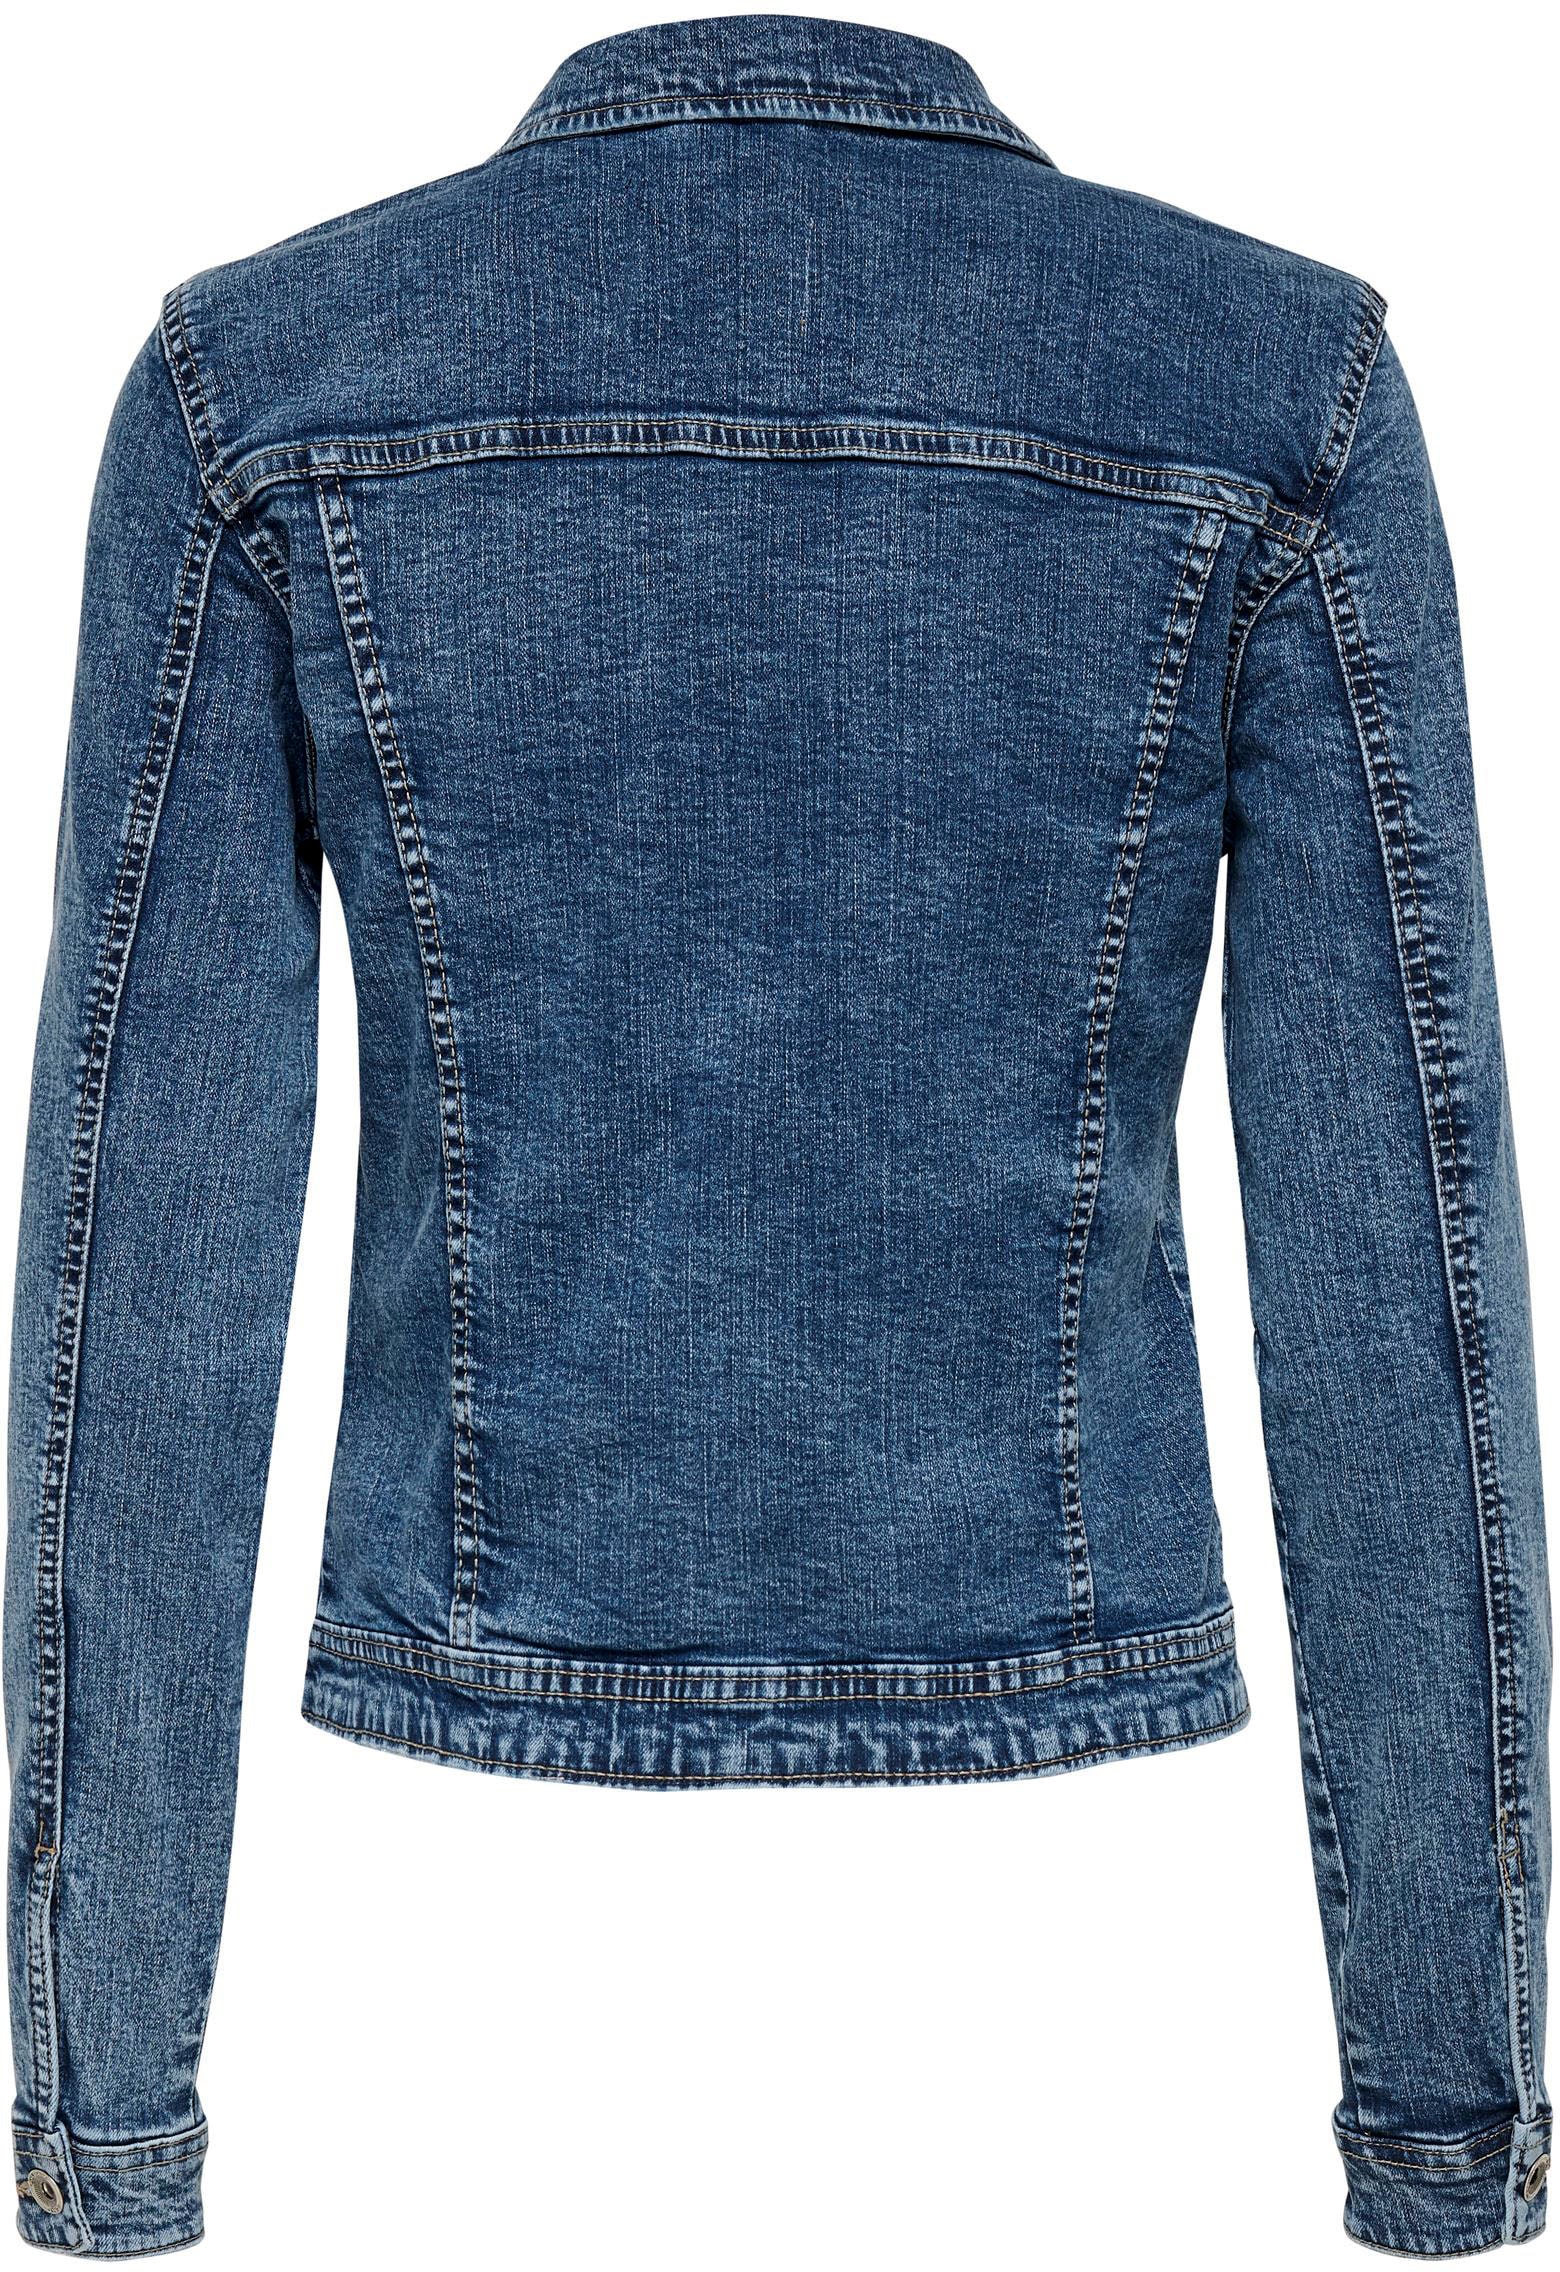 ONLY Jeansjacke »ONLTIA DNM JACKET MB BEX02 NOOS«, in leichter Used-Waschung mit Stretch